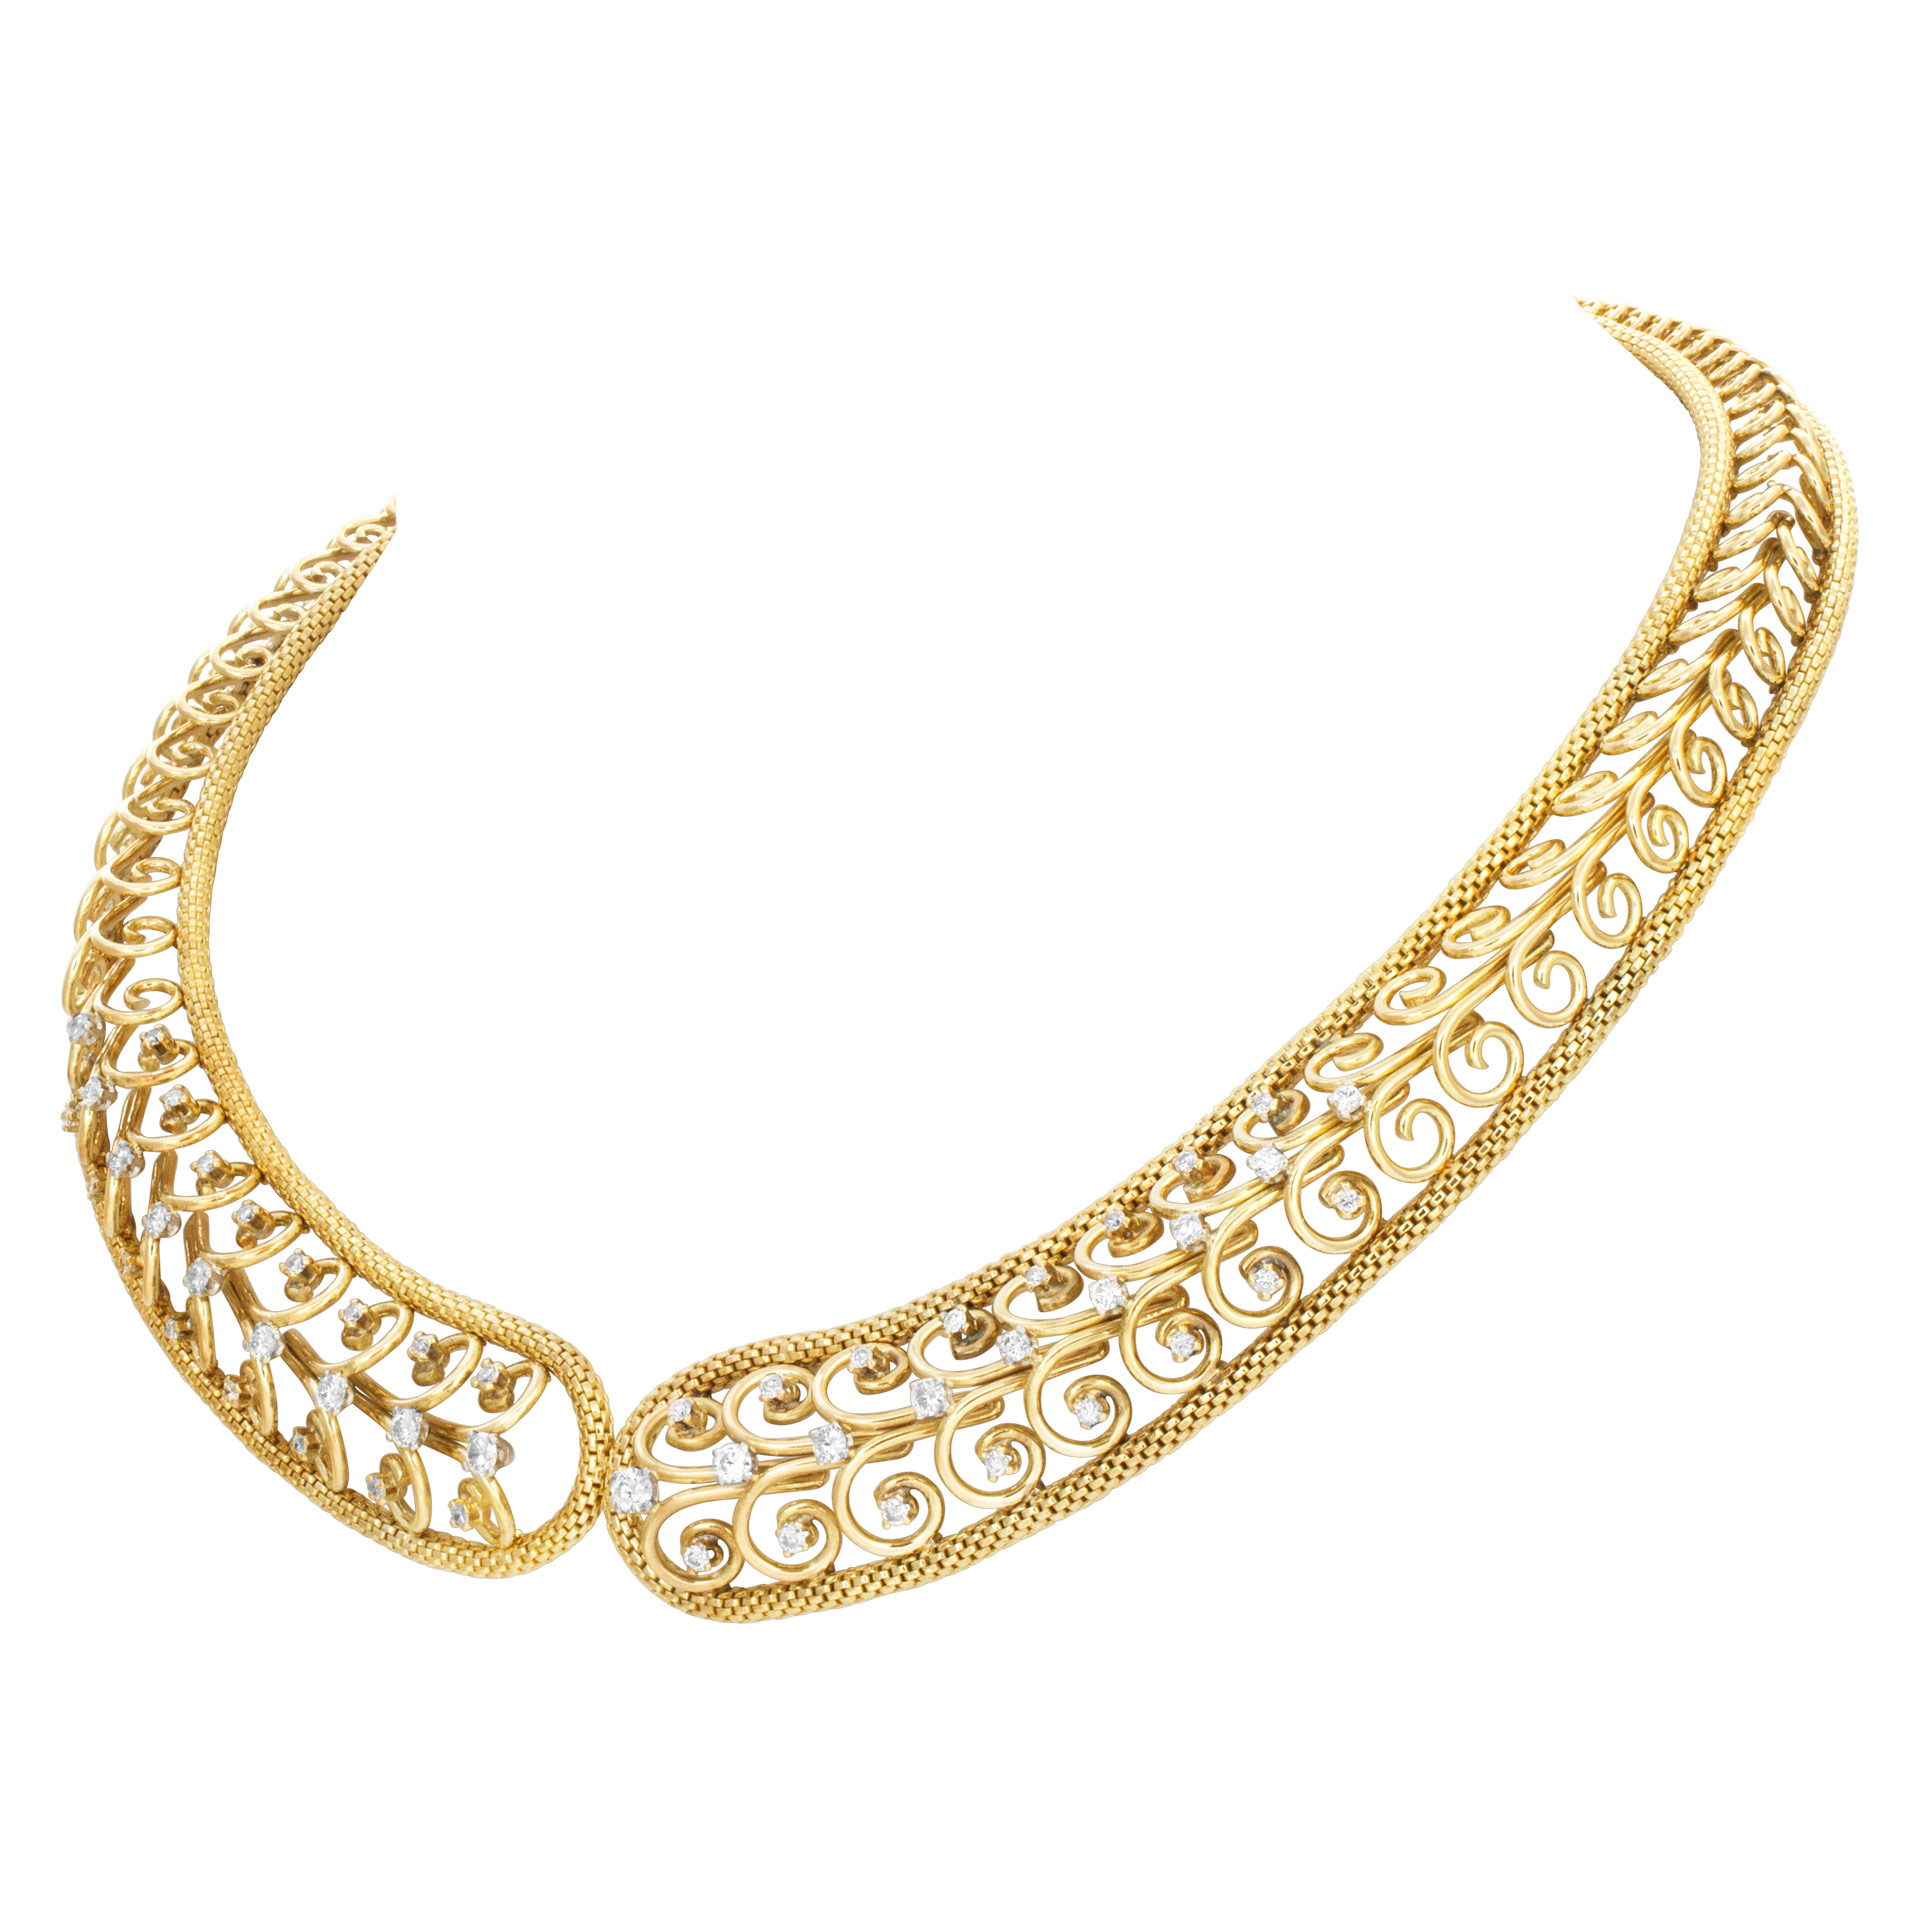 Swirl link choker necklace with diamond accents in 18k (Stones) image 4